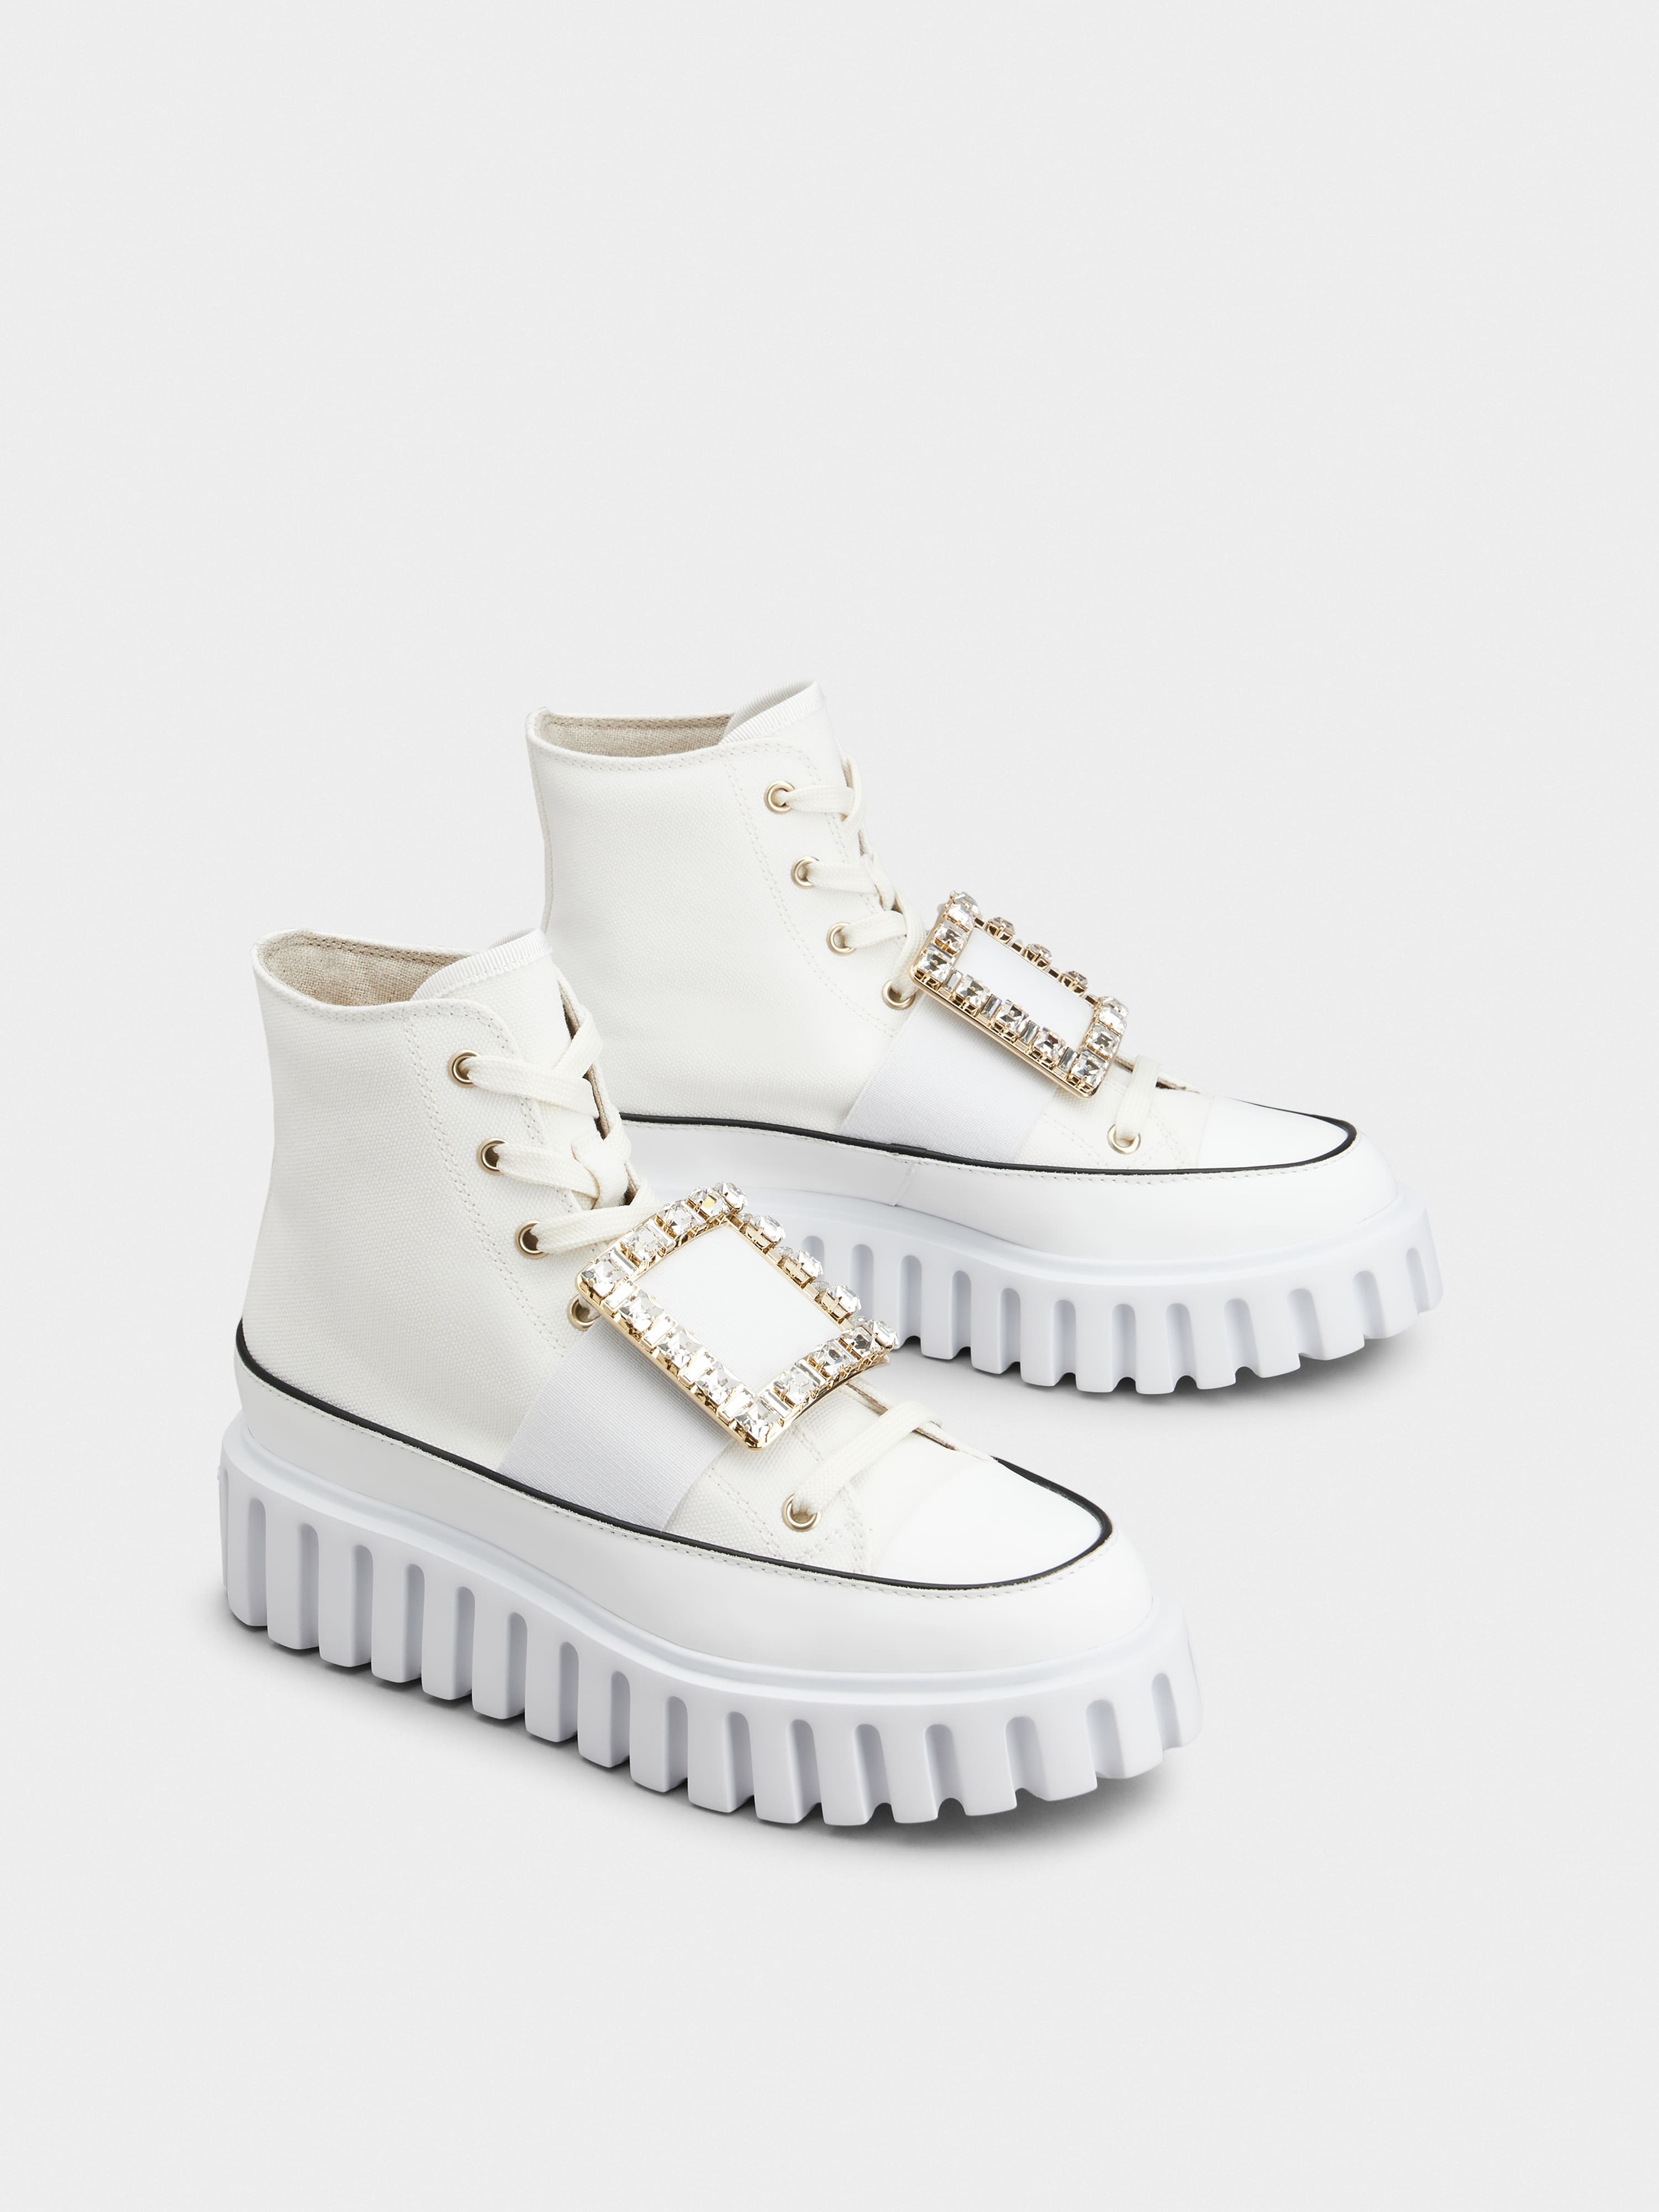 Viv' Go-Thick Strass Buckle Hi-Top Sneakers in Canvas - 2